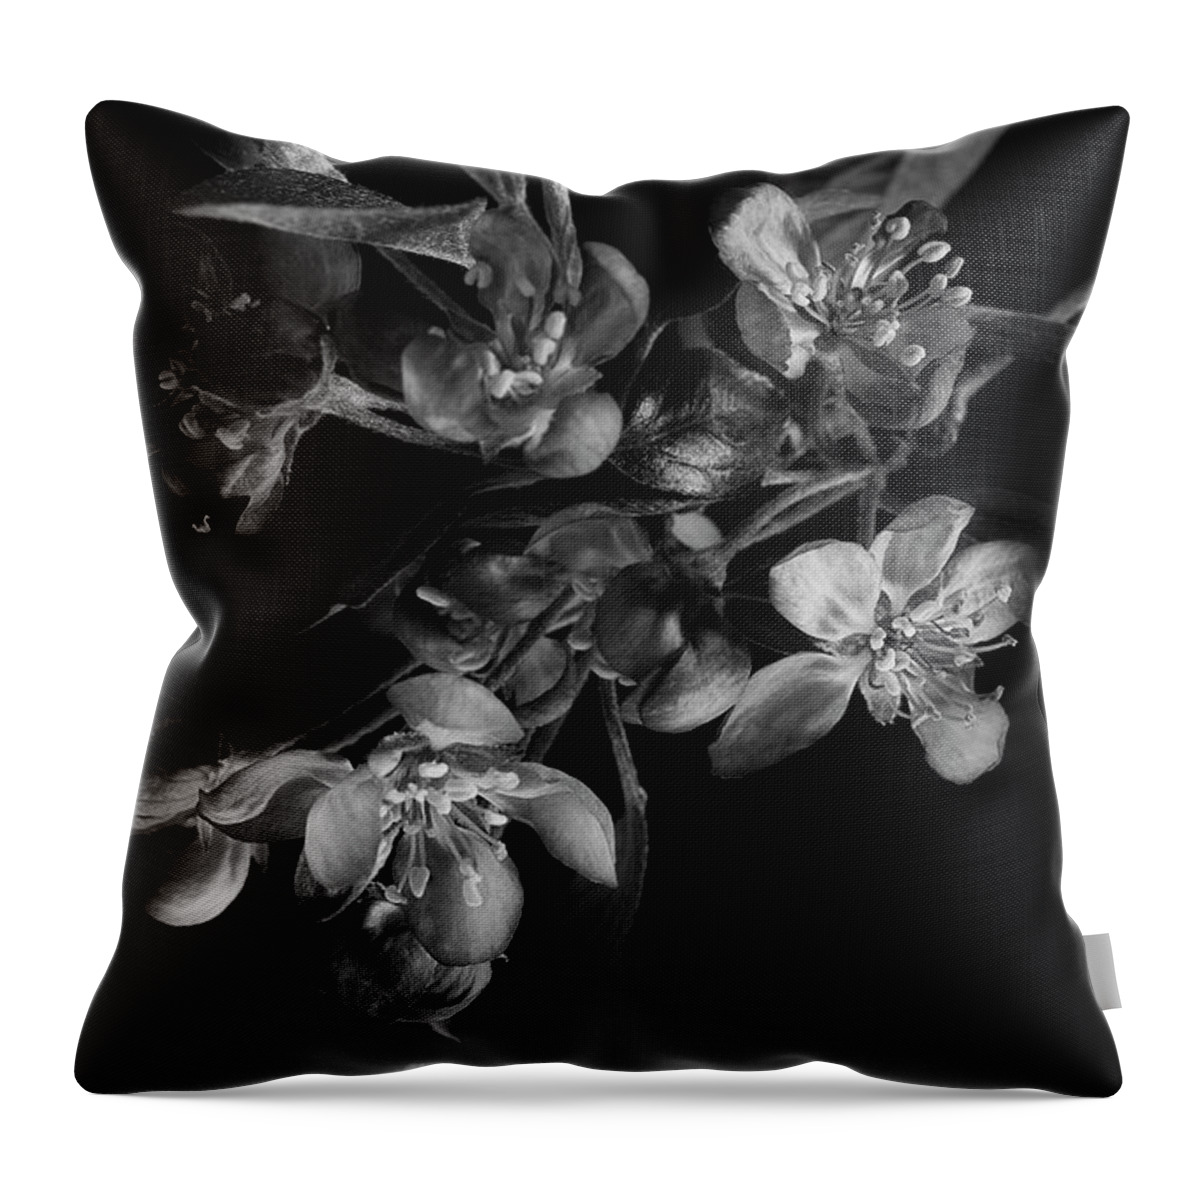 Flower Throw Pillow featuring the photograph A Black And White Spring by Mike Eingle